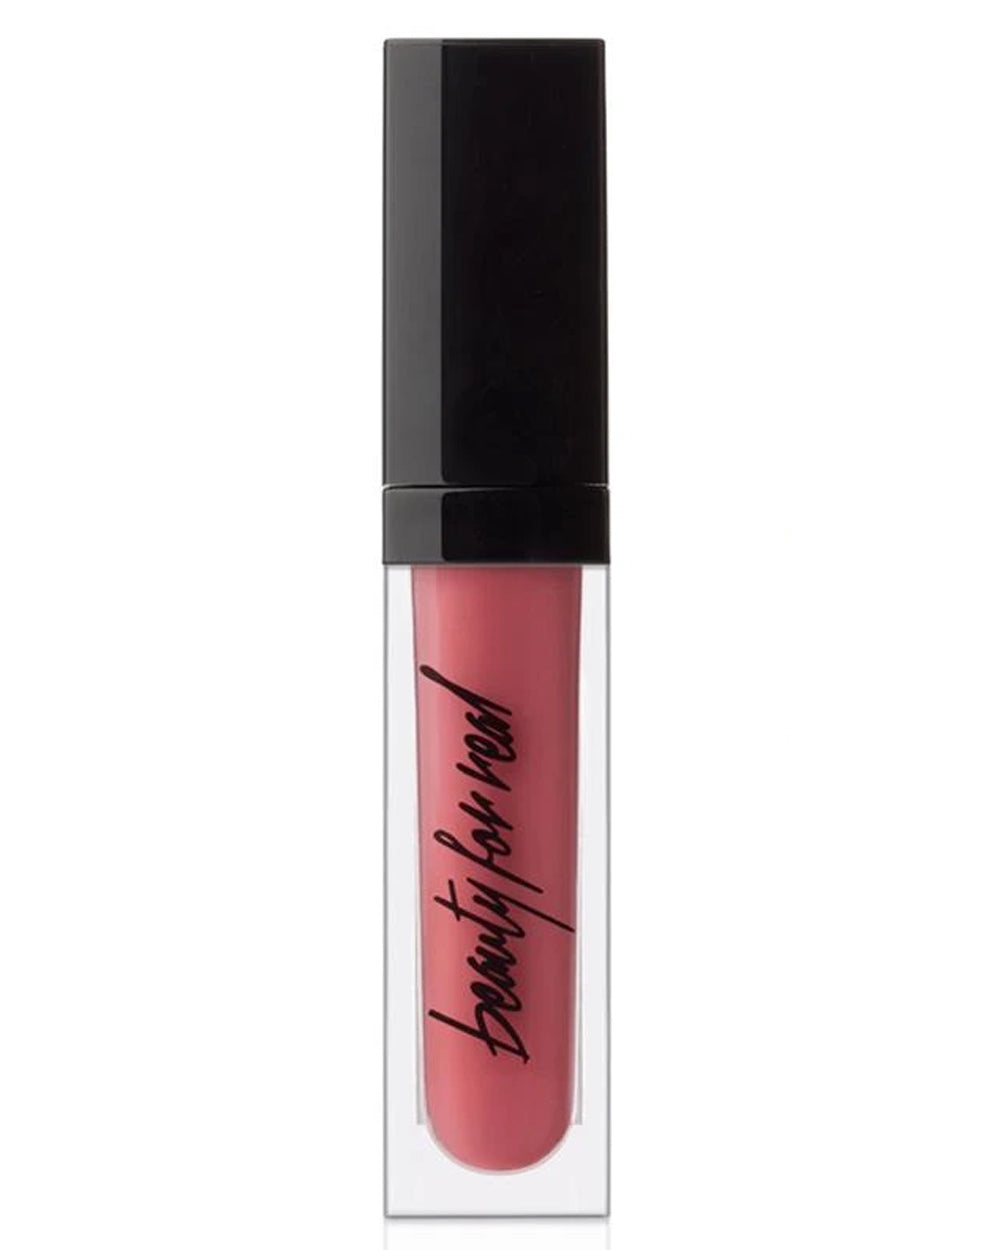 Flash Lip Cream and Color in Kiss Me